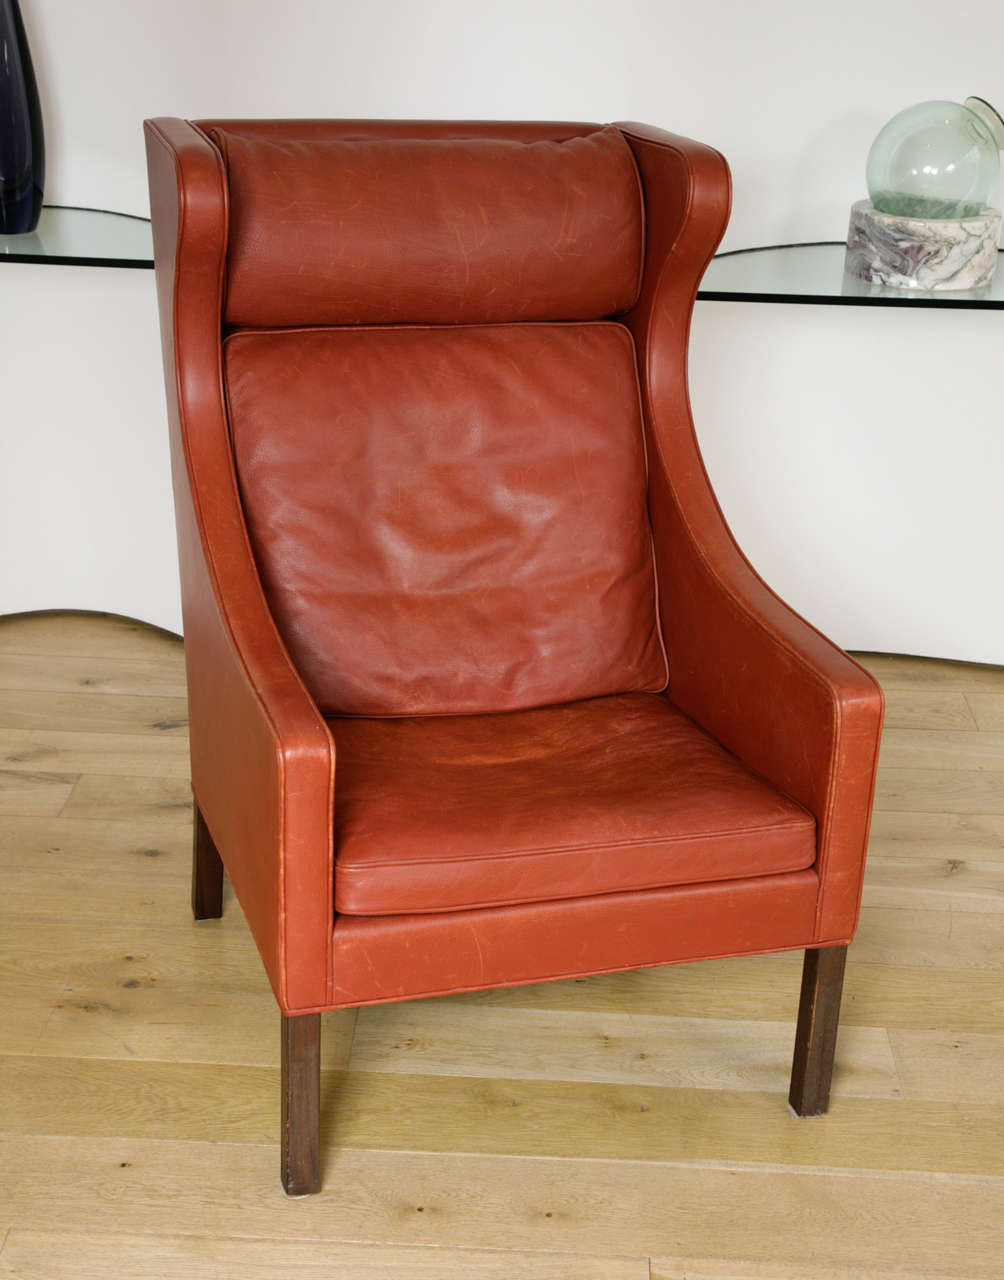 russet-coloured leather with teak legs